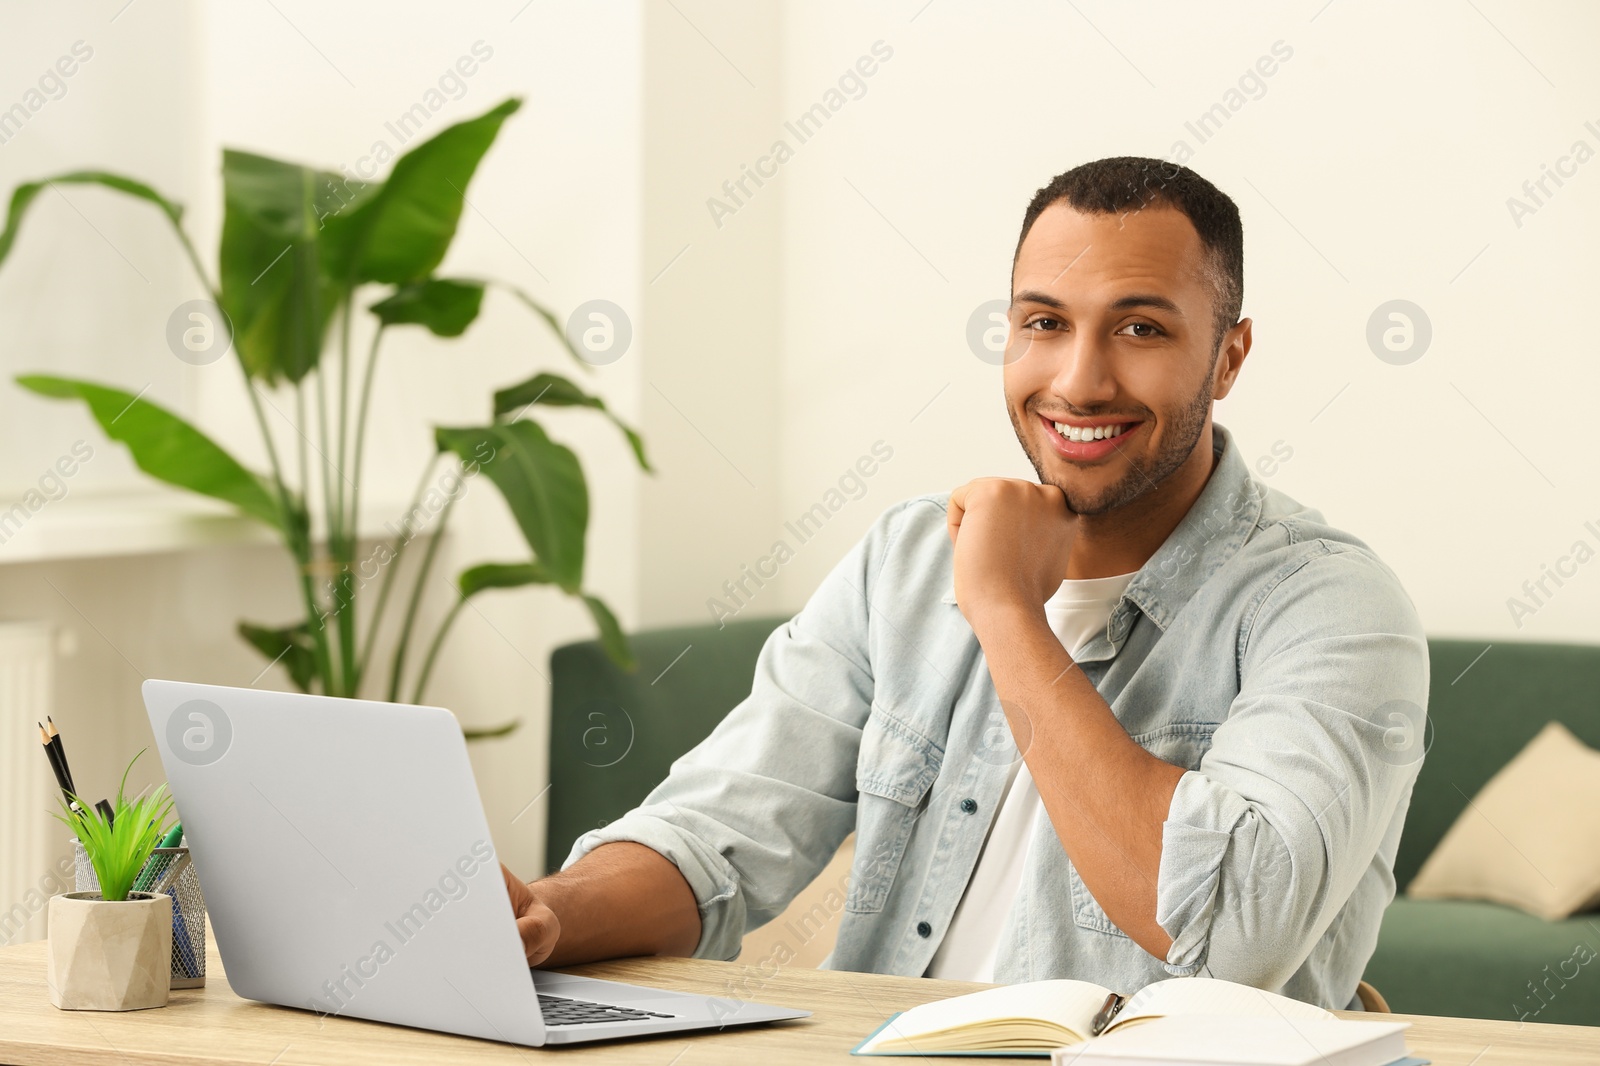 Photo of Portrait of African American man near laptop at wooden table in room